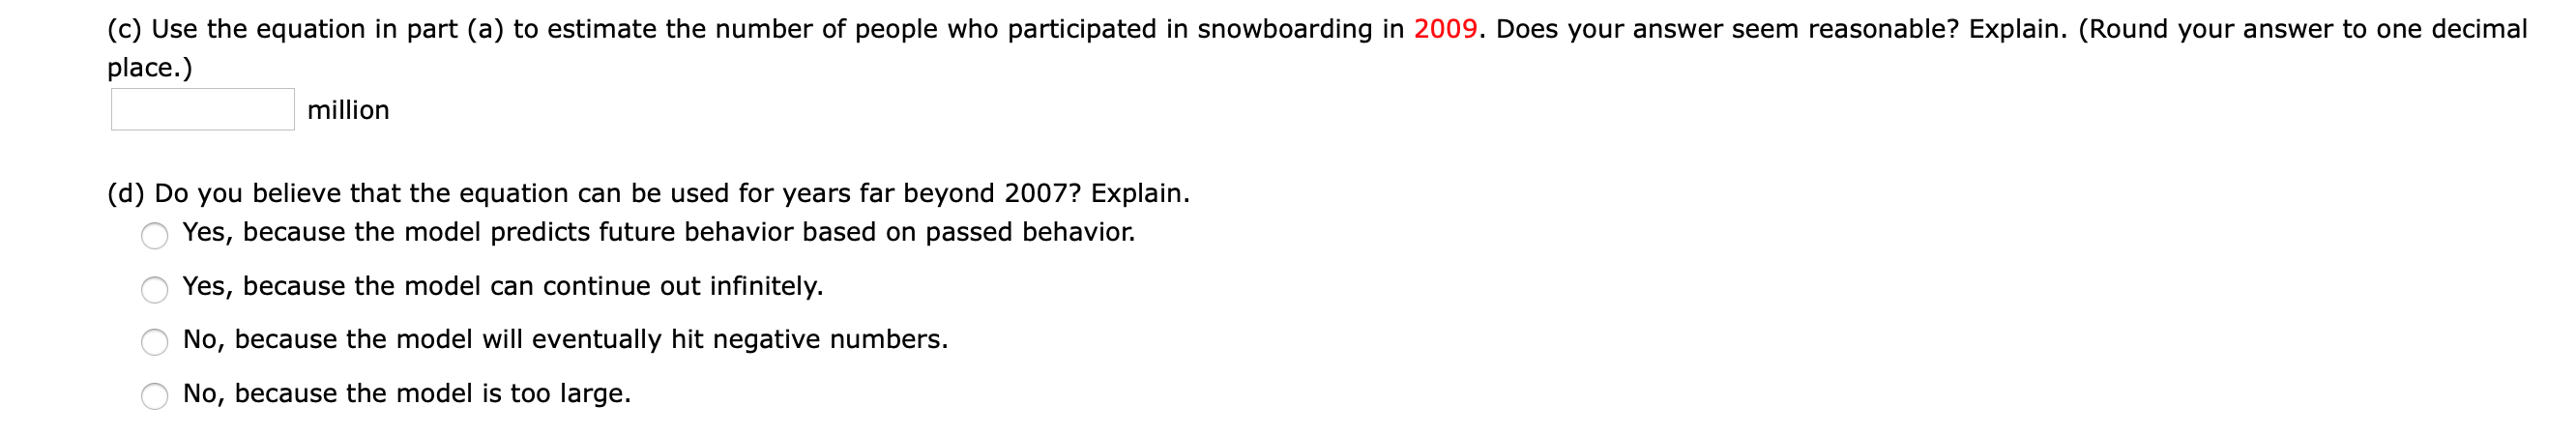 (c) Use the equation in part (a) to estimate the number of people who participated in snowboarding in 2009. Does your answer seem reasonable? Explain. (Round your answer to one decimal
place.)
million
(d) Do you believe that the equation can be used for years far beyond 2007? Explain.
Yes, because the model predicts future behavior based on passed behavior.
Yes, because the model can continue out infinitely.
No, because the model will eventually hit negative numbers.
No, because the model is too large.
